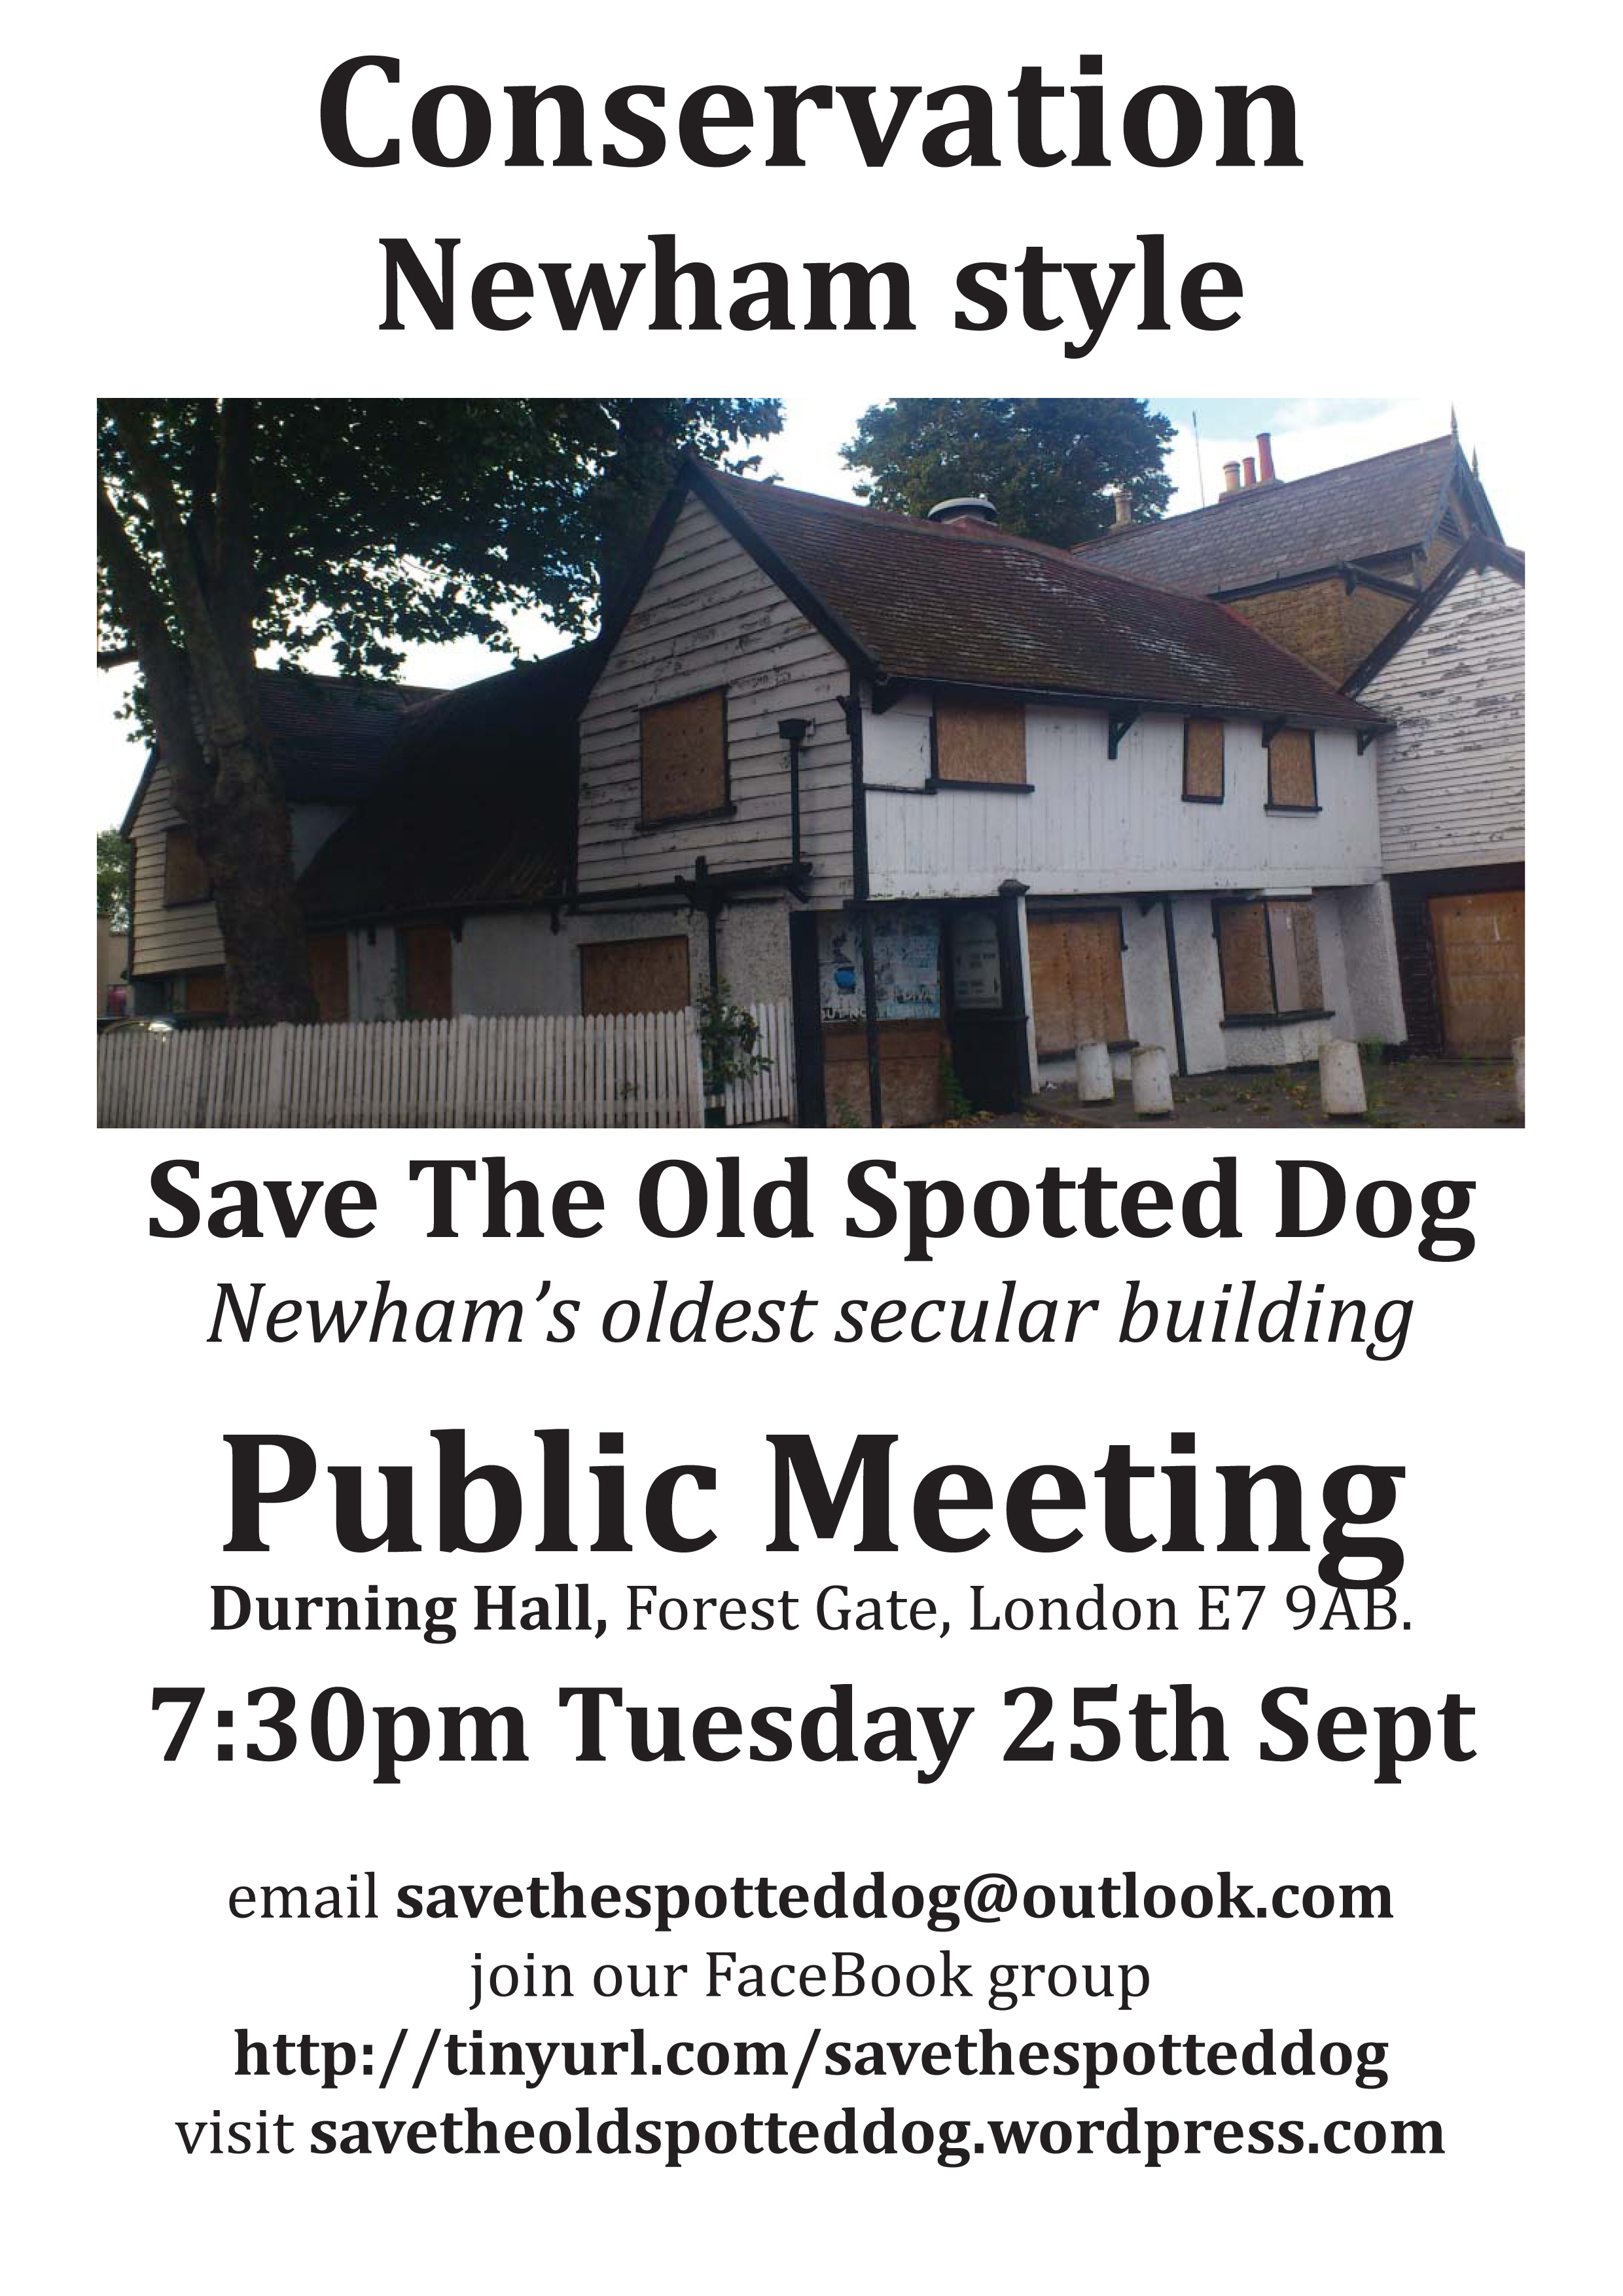 Flyers for the public meeting